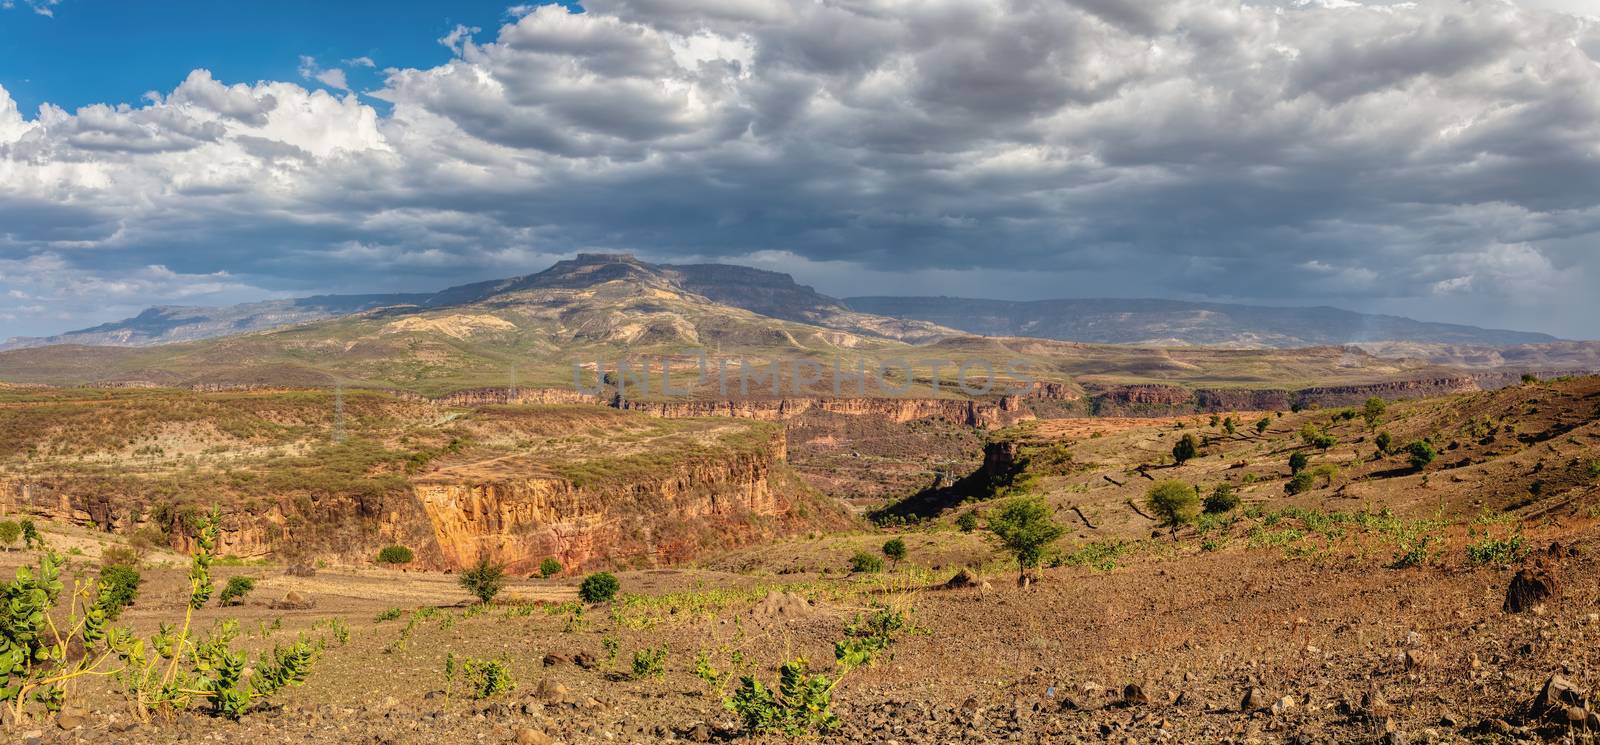 mountain landscape with canyon, Ethiopia by artush